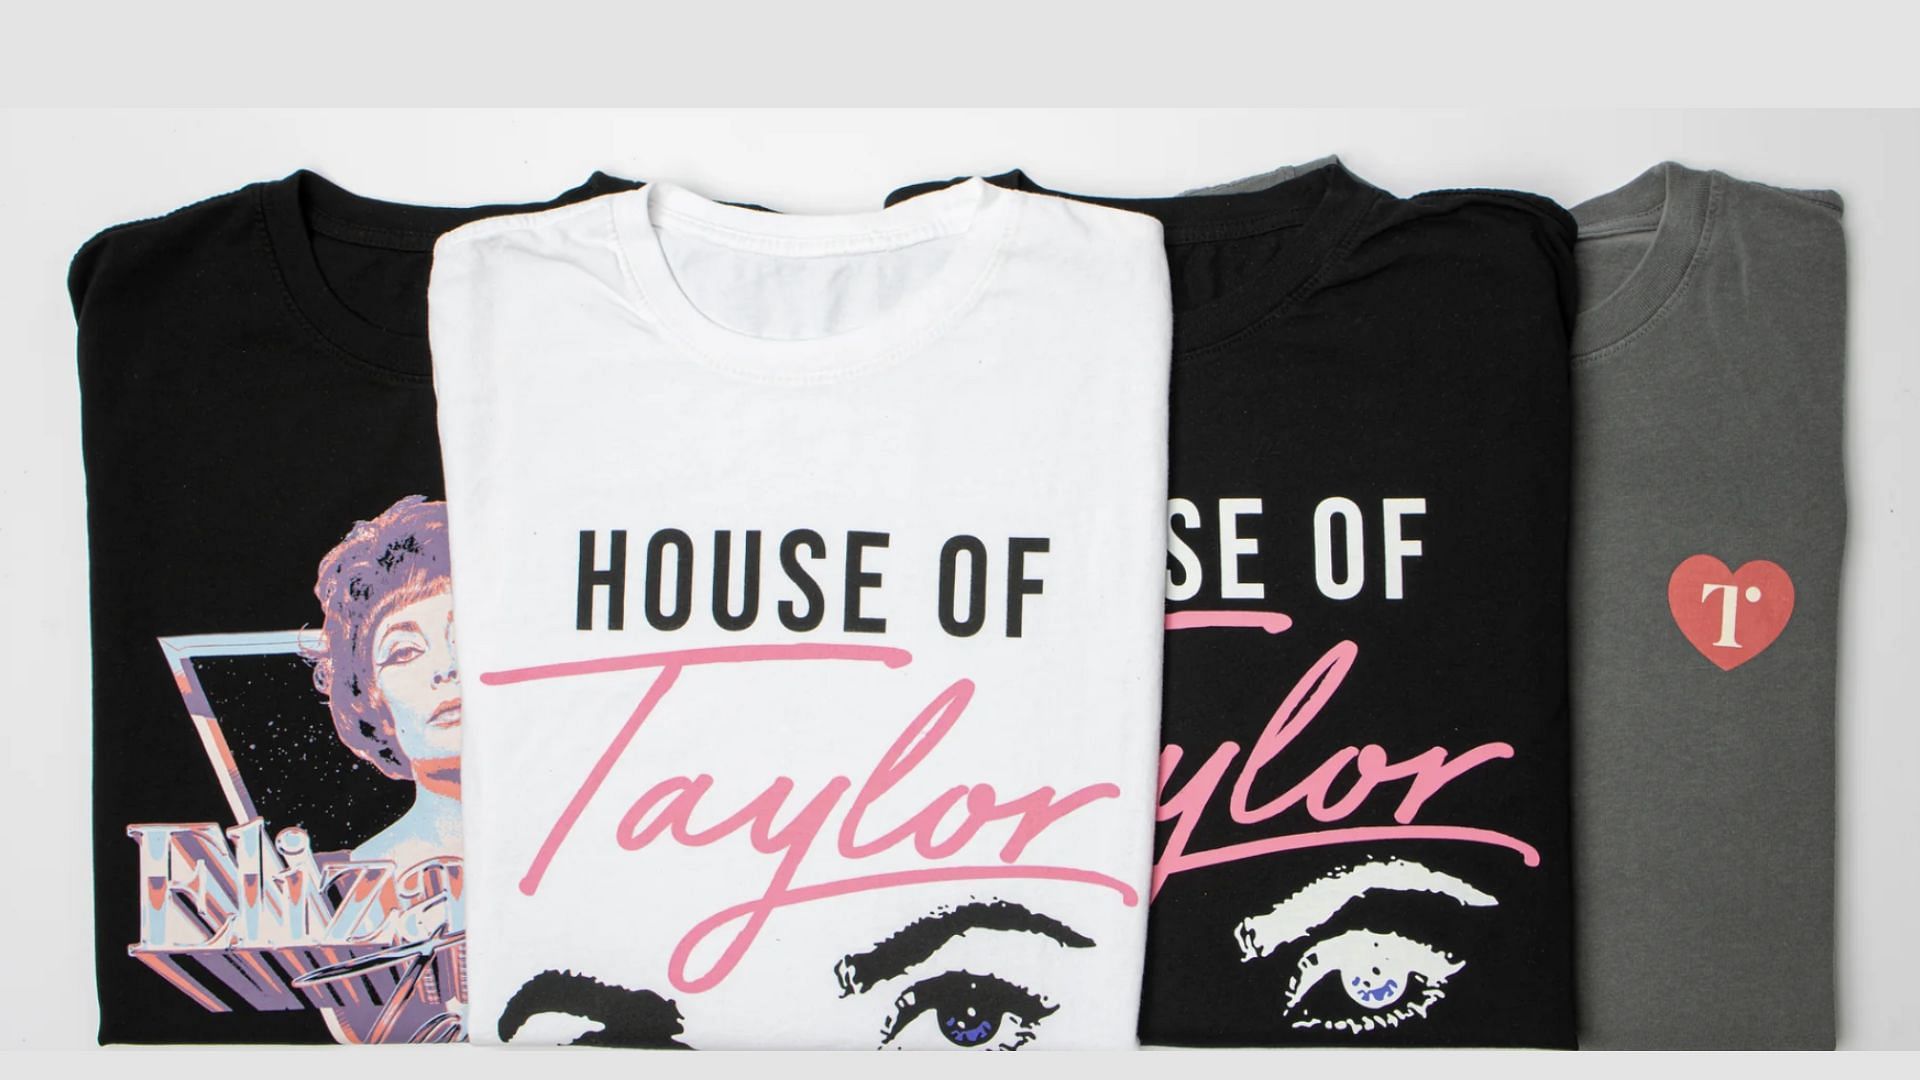 These apparel items are adorned with themed graphic prints (Image via House of Taylor)